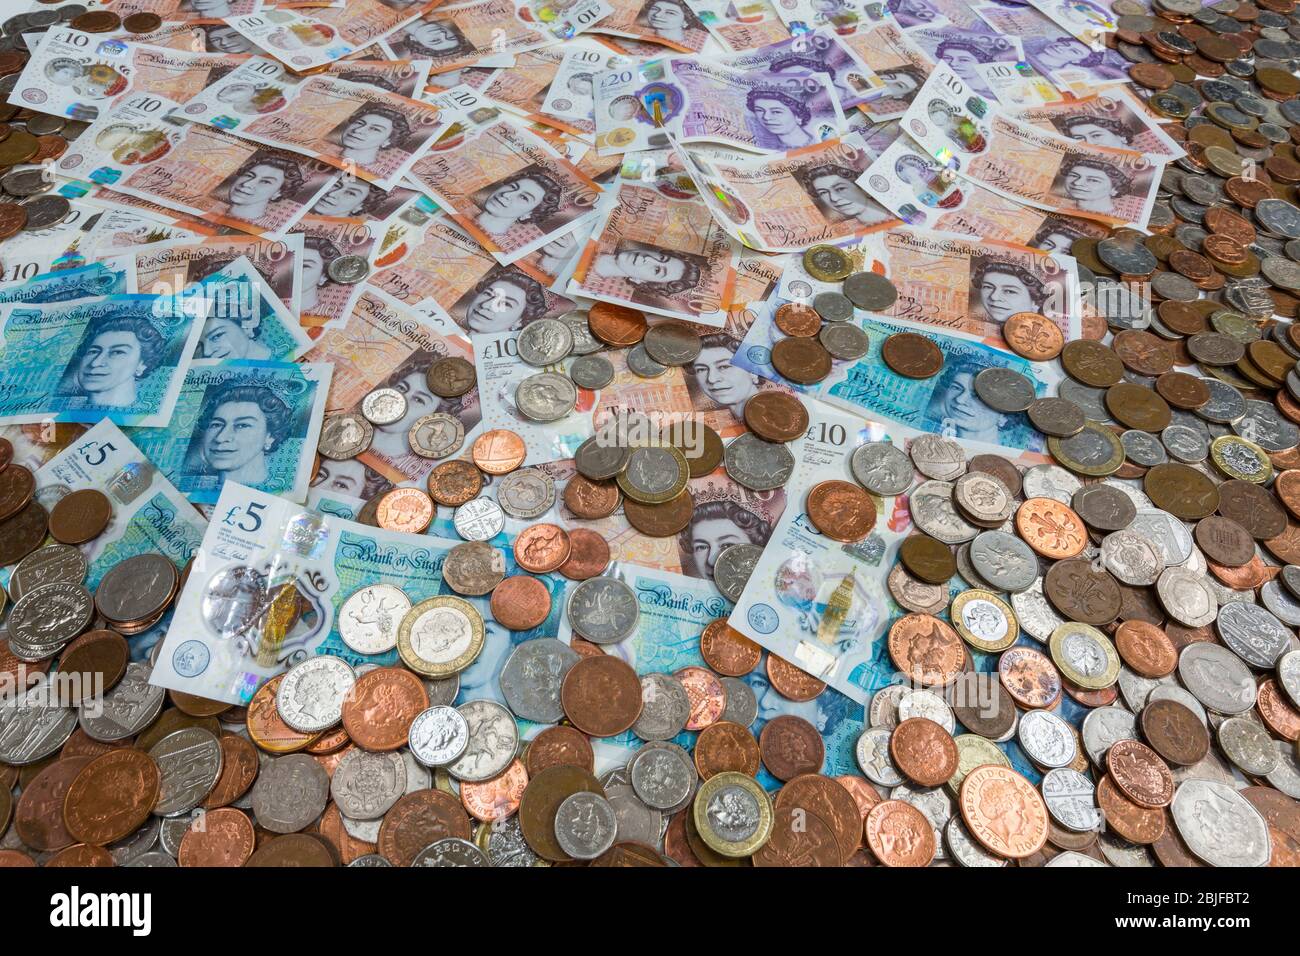 UK sterling  pound notes and coins. New polymer £5, £10 and £20 notes and all coins from 1penny to £2. Stock Photo